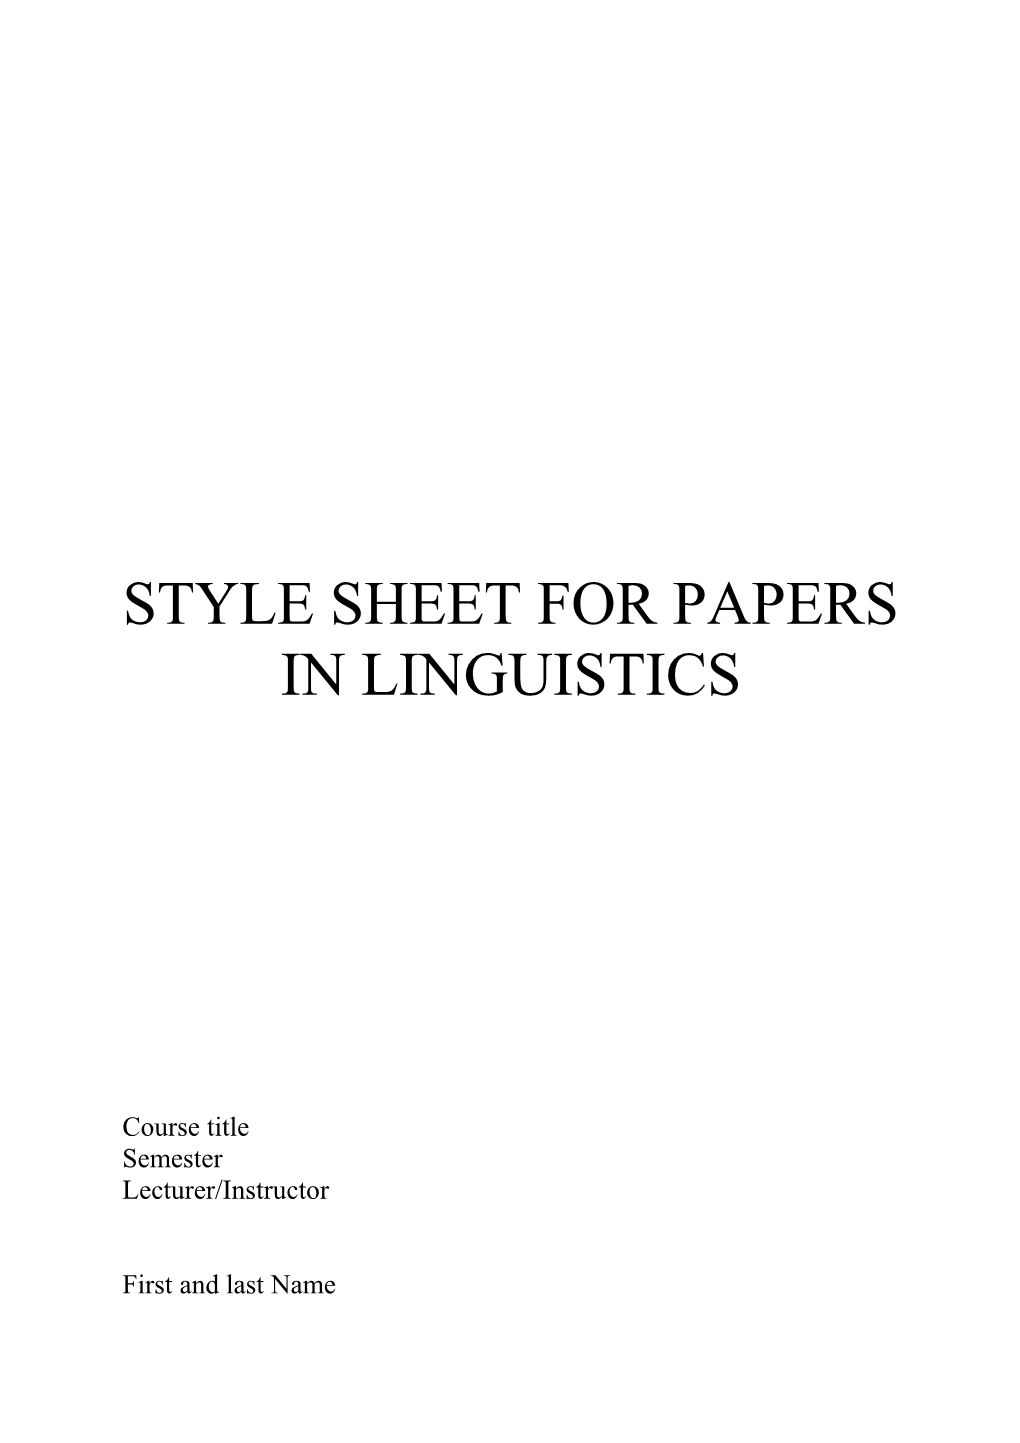 Style Sheet for Papers in Linguistics s1